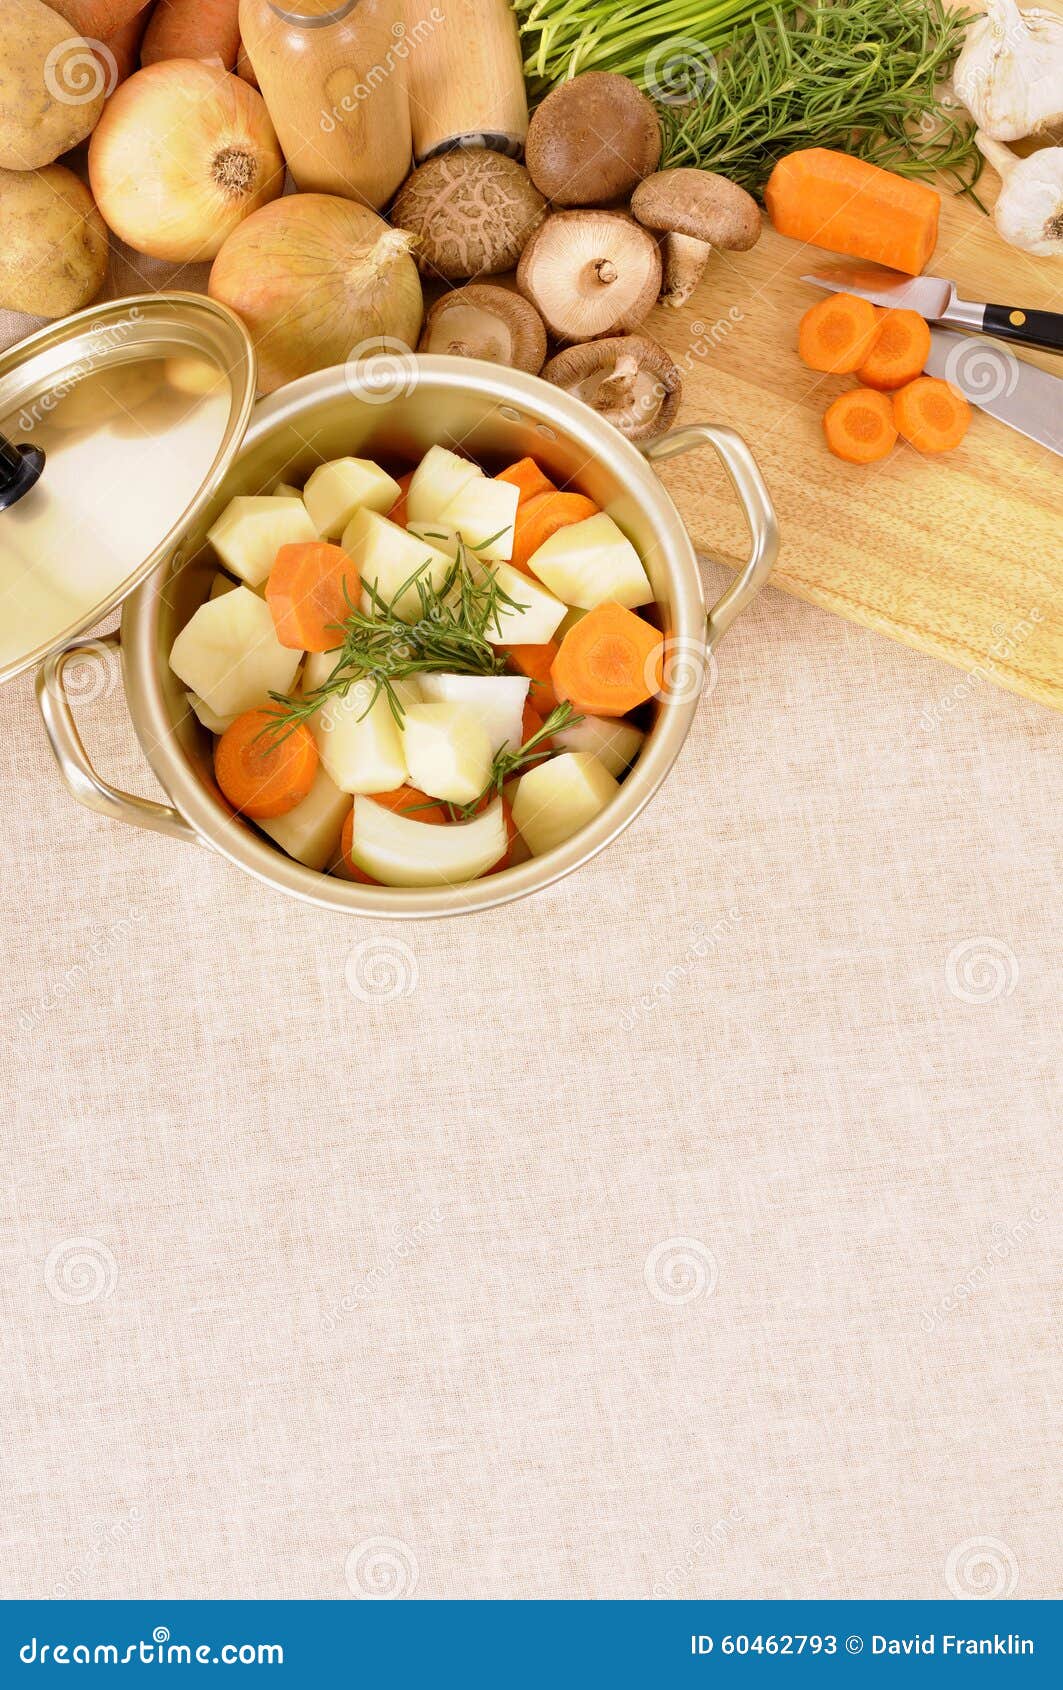 casserole dish or stockpot with organic vegetables and kitchen chopping board, copy space, vertical